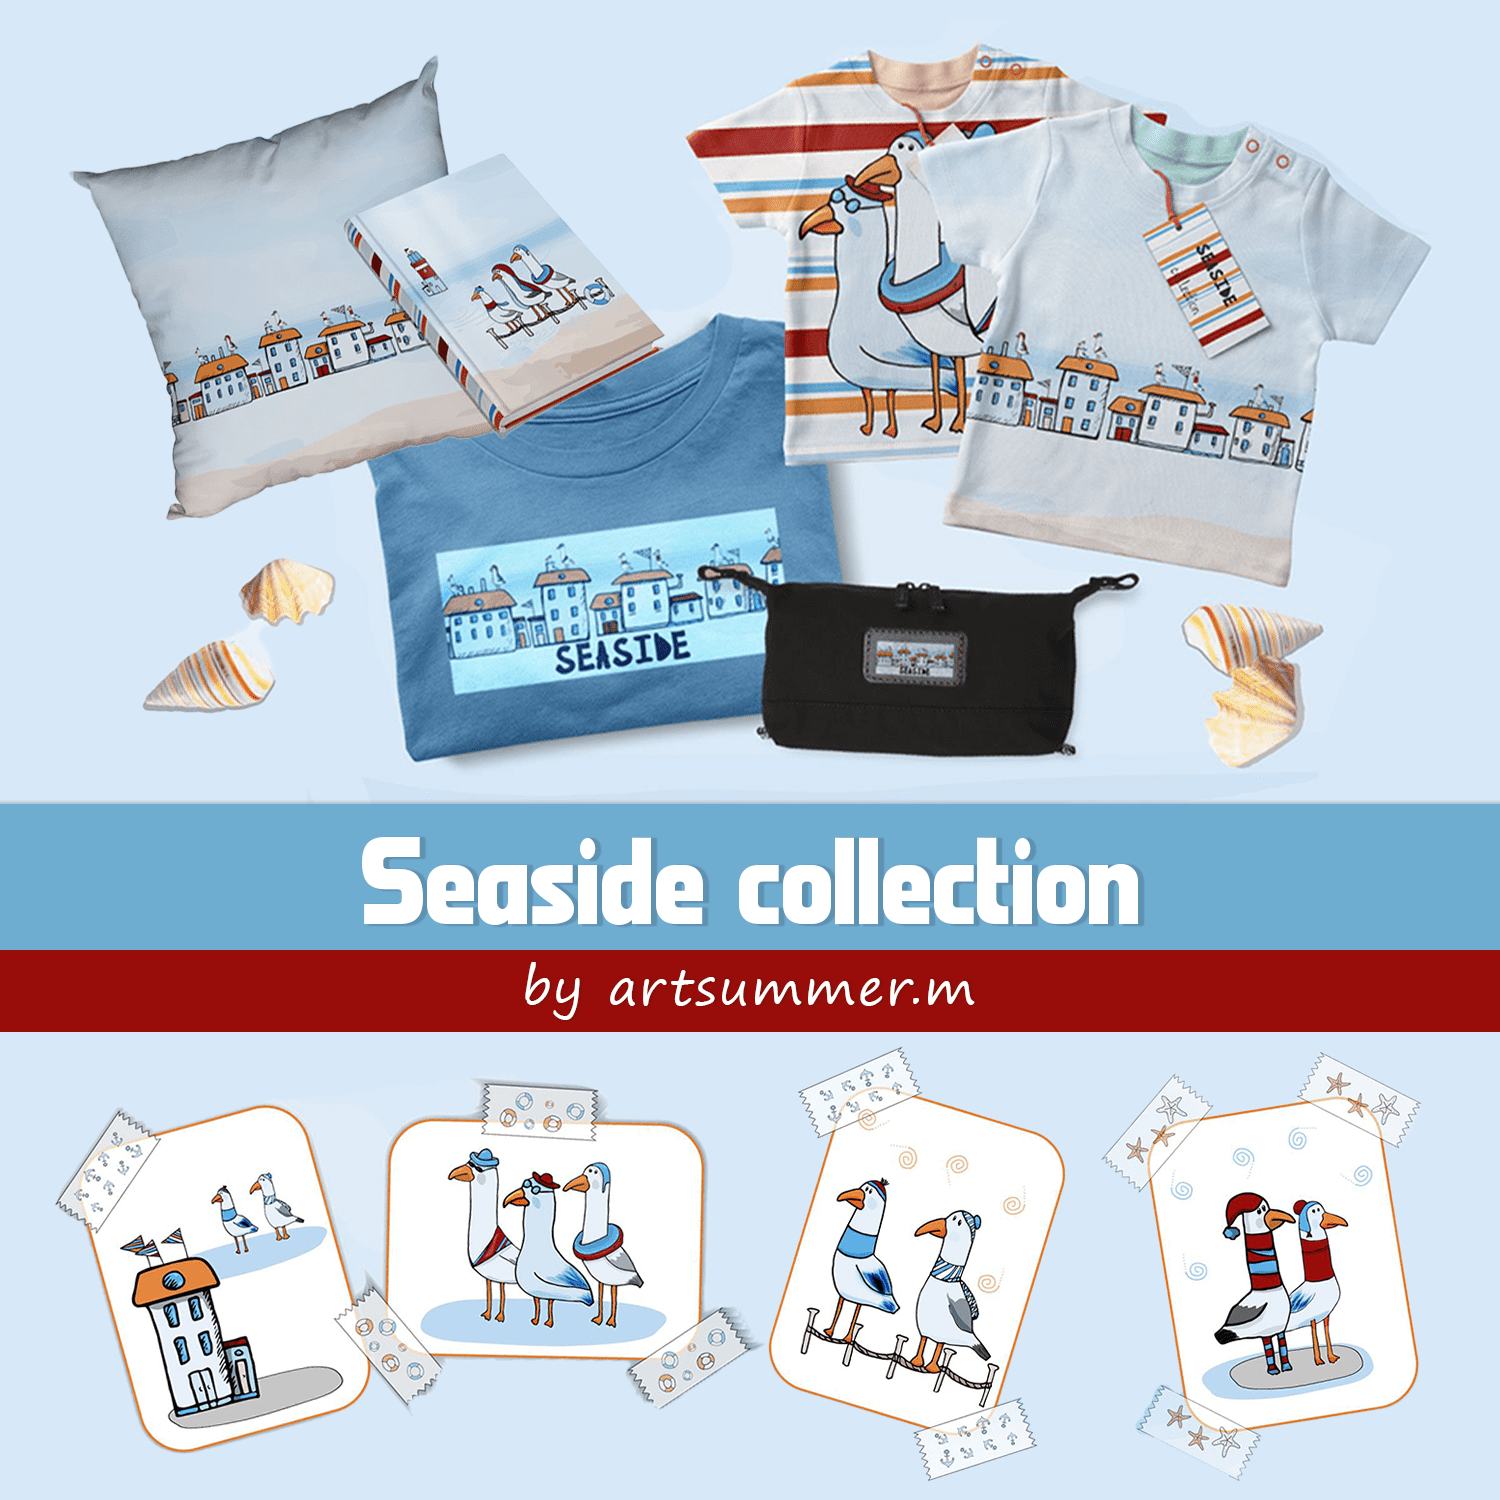 Seaside collection.